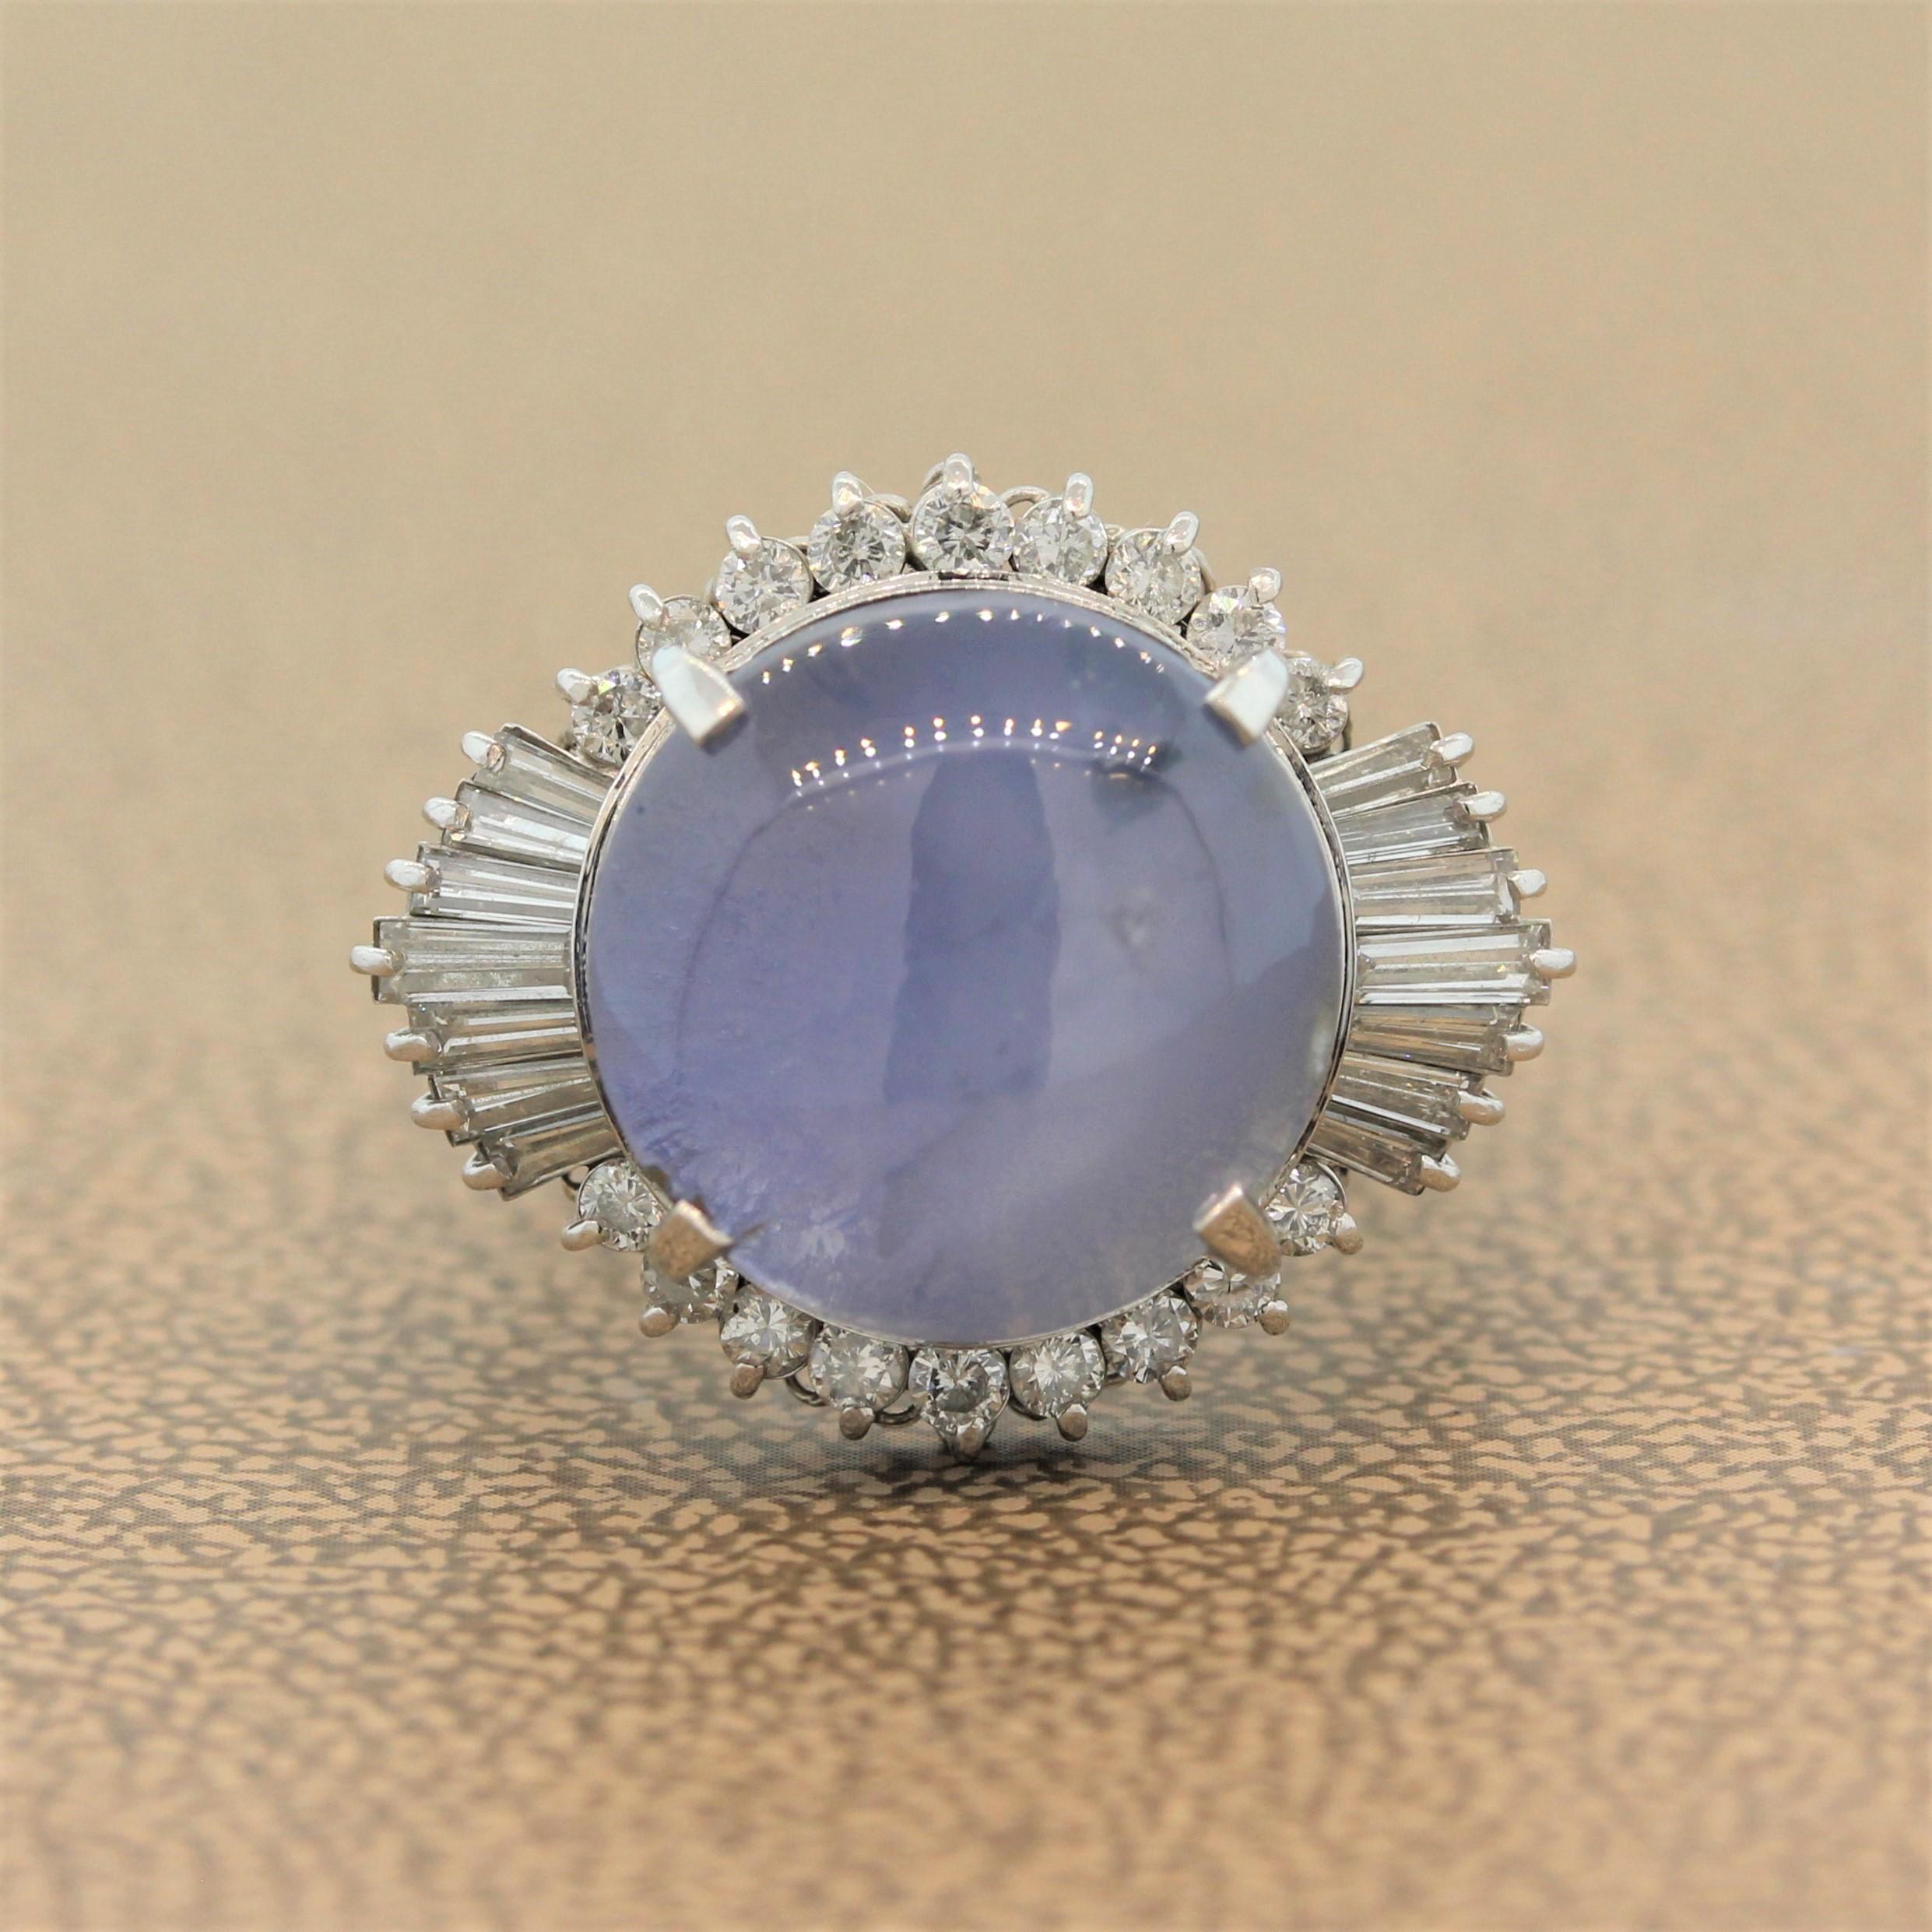 Star light star bright! A stunning 12.98 carat star sapphire is featured in this platinum ring. With 0.89 carats of round cut and baguette cut diamonds haloing the precious cabochon gemstone, this is a well-made ring with high quality stones.

Ring